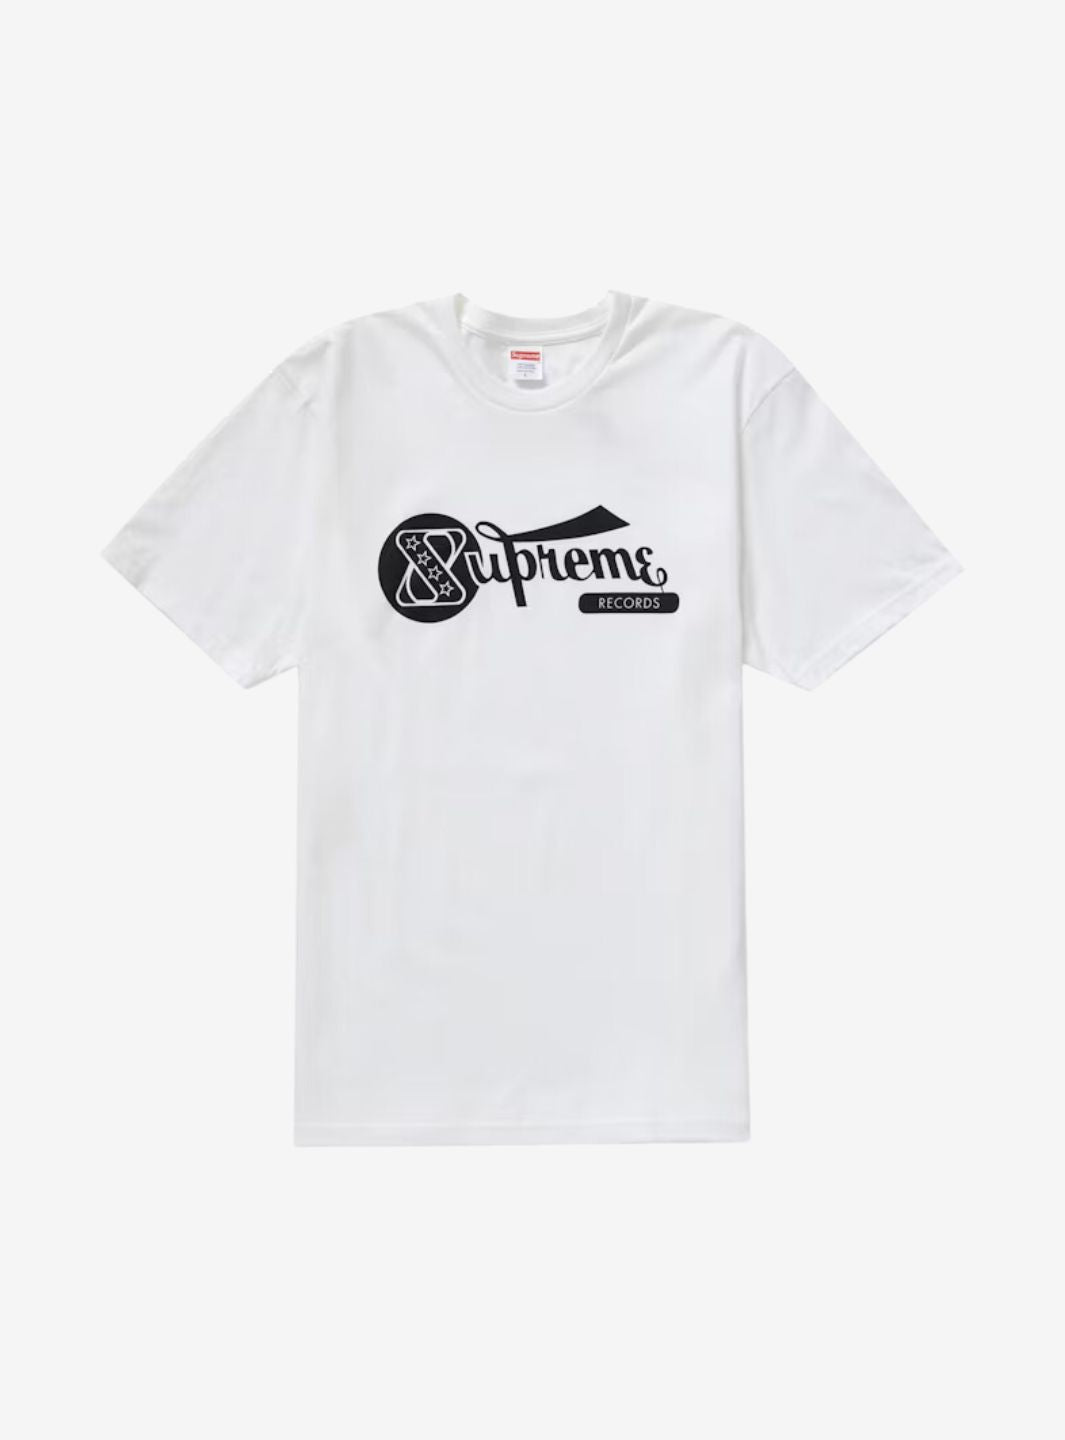 Supreme Records T-Shirt White | ResellZone